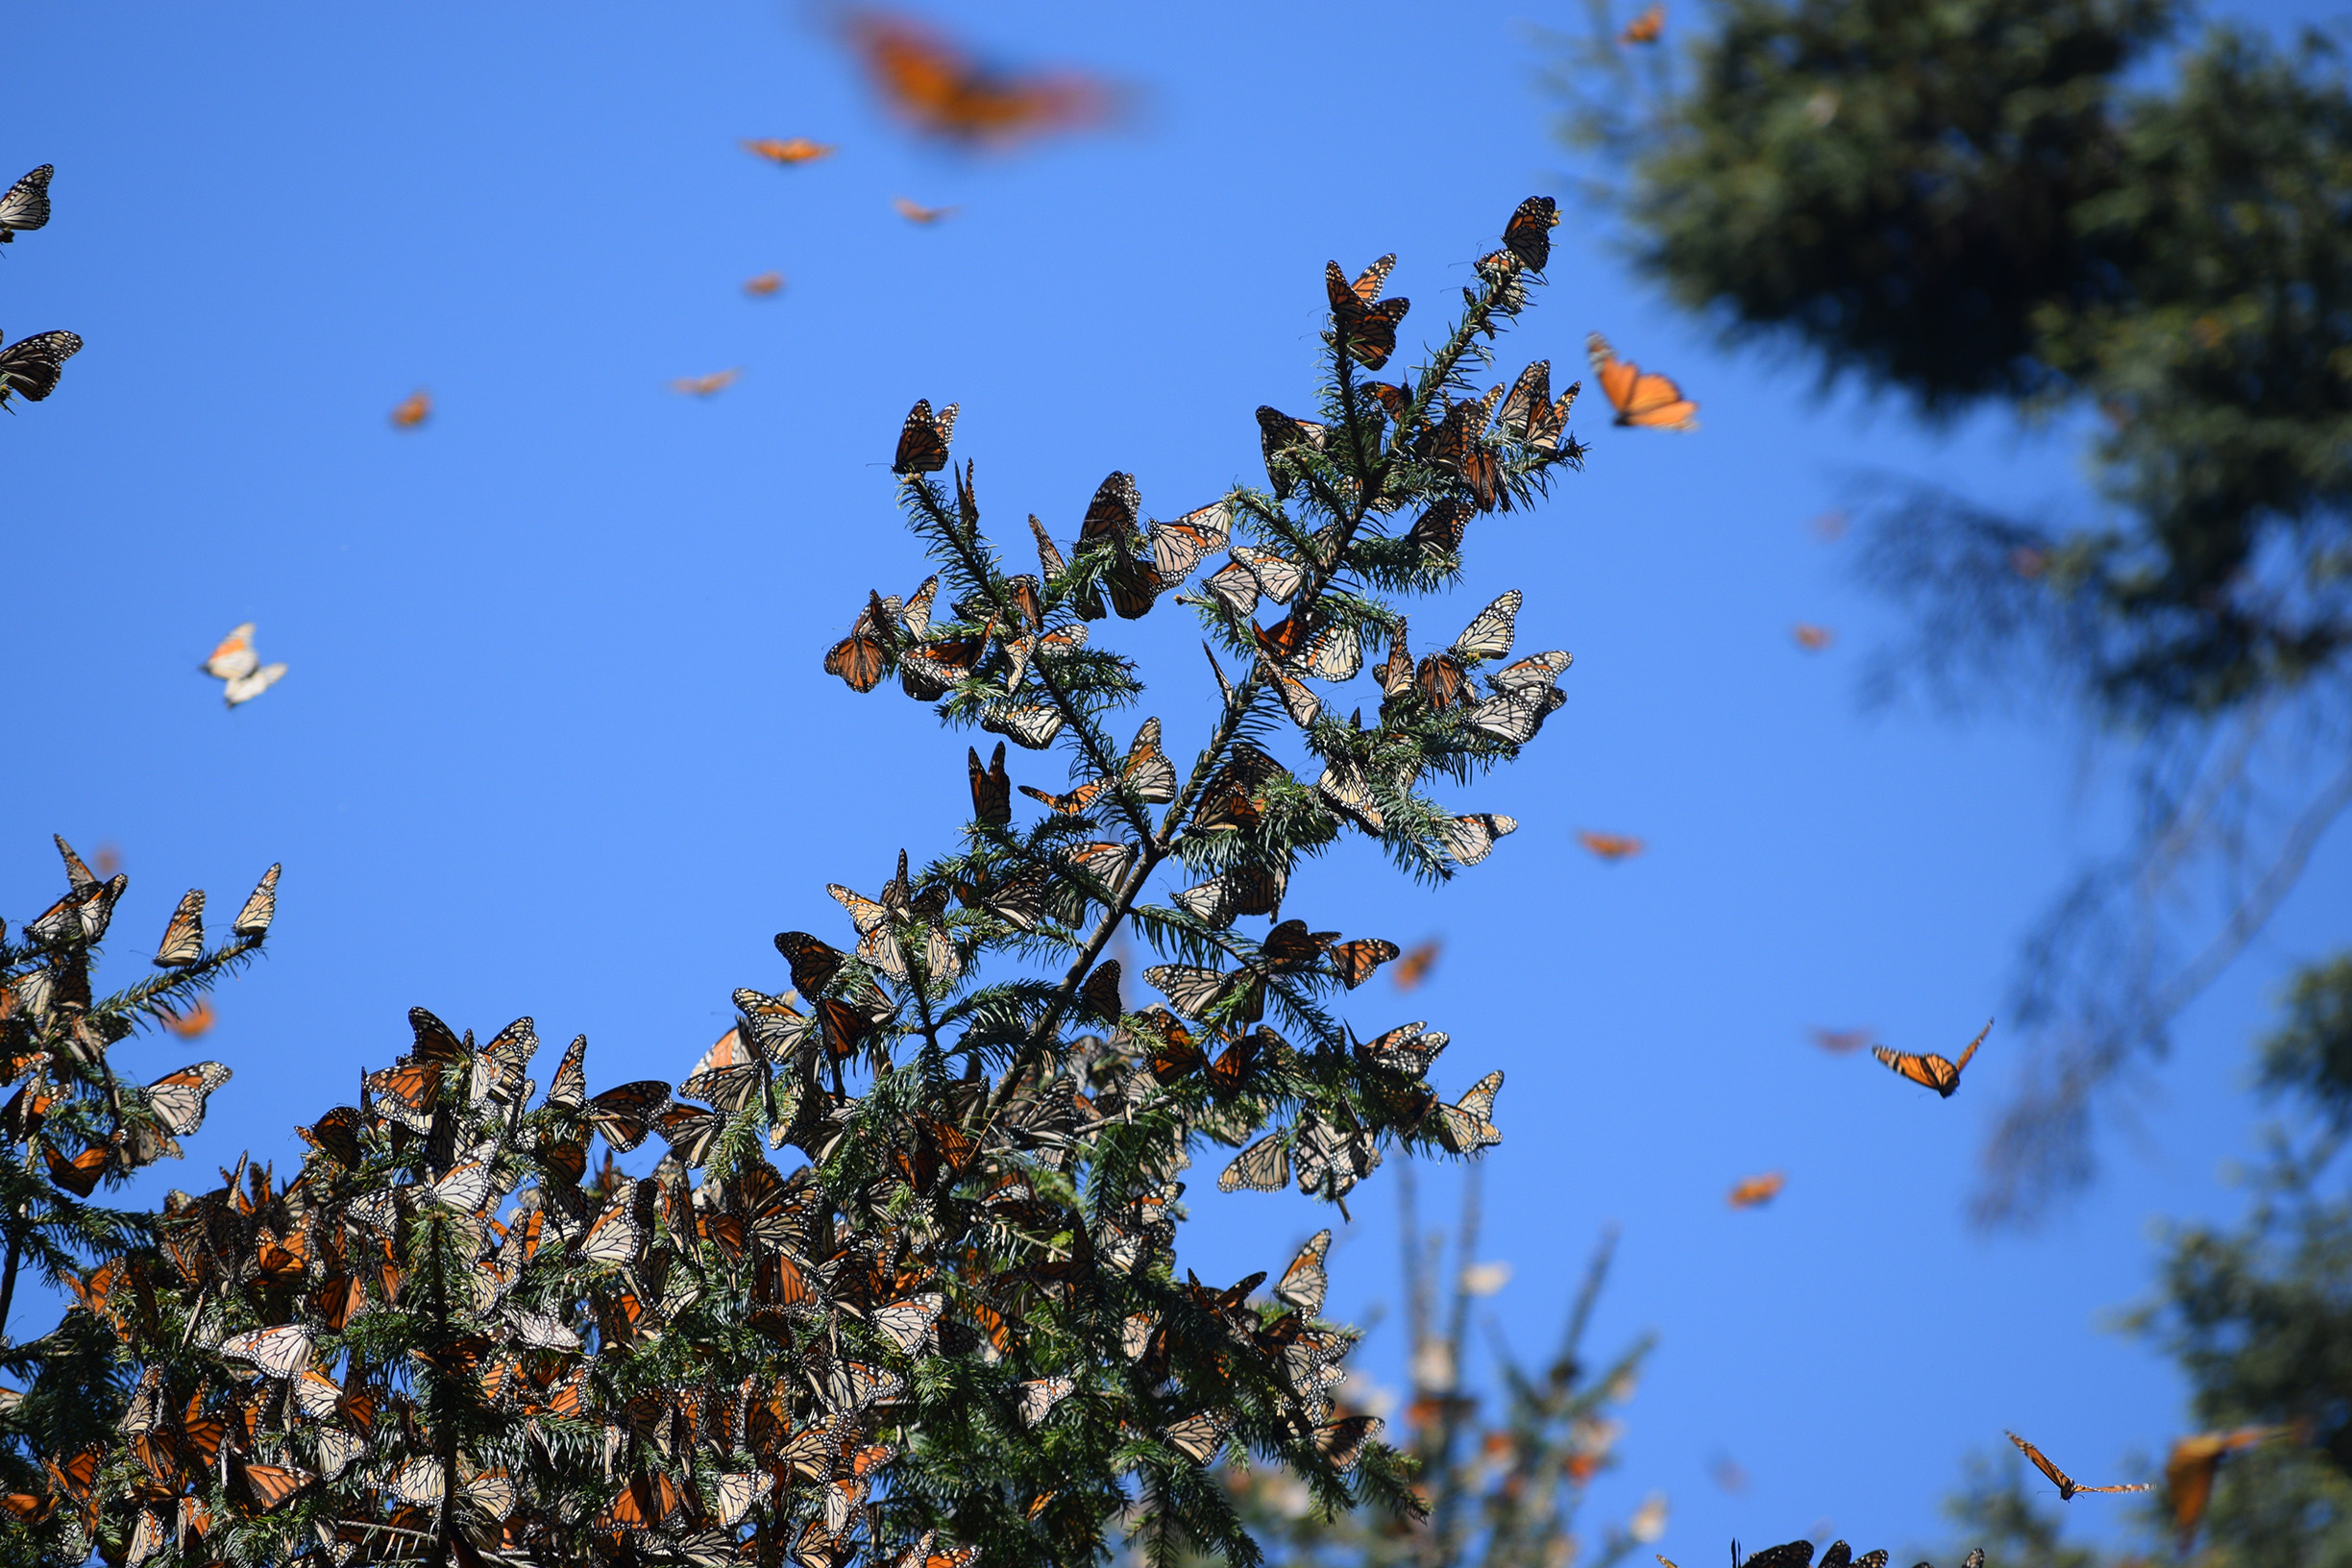 Orange-and-black monarch butterflies cling to the green branches of tress and fly in the blue sky 